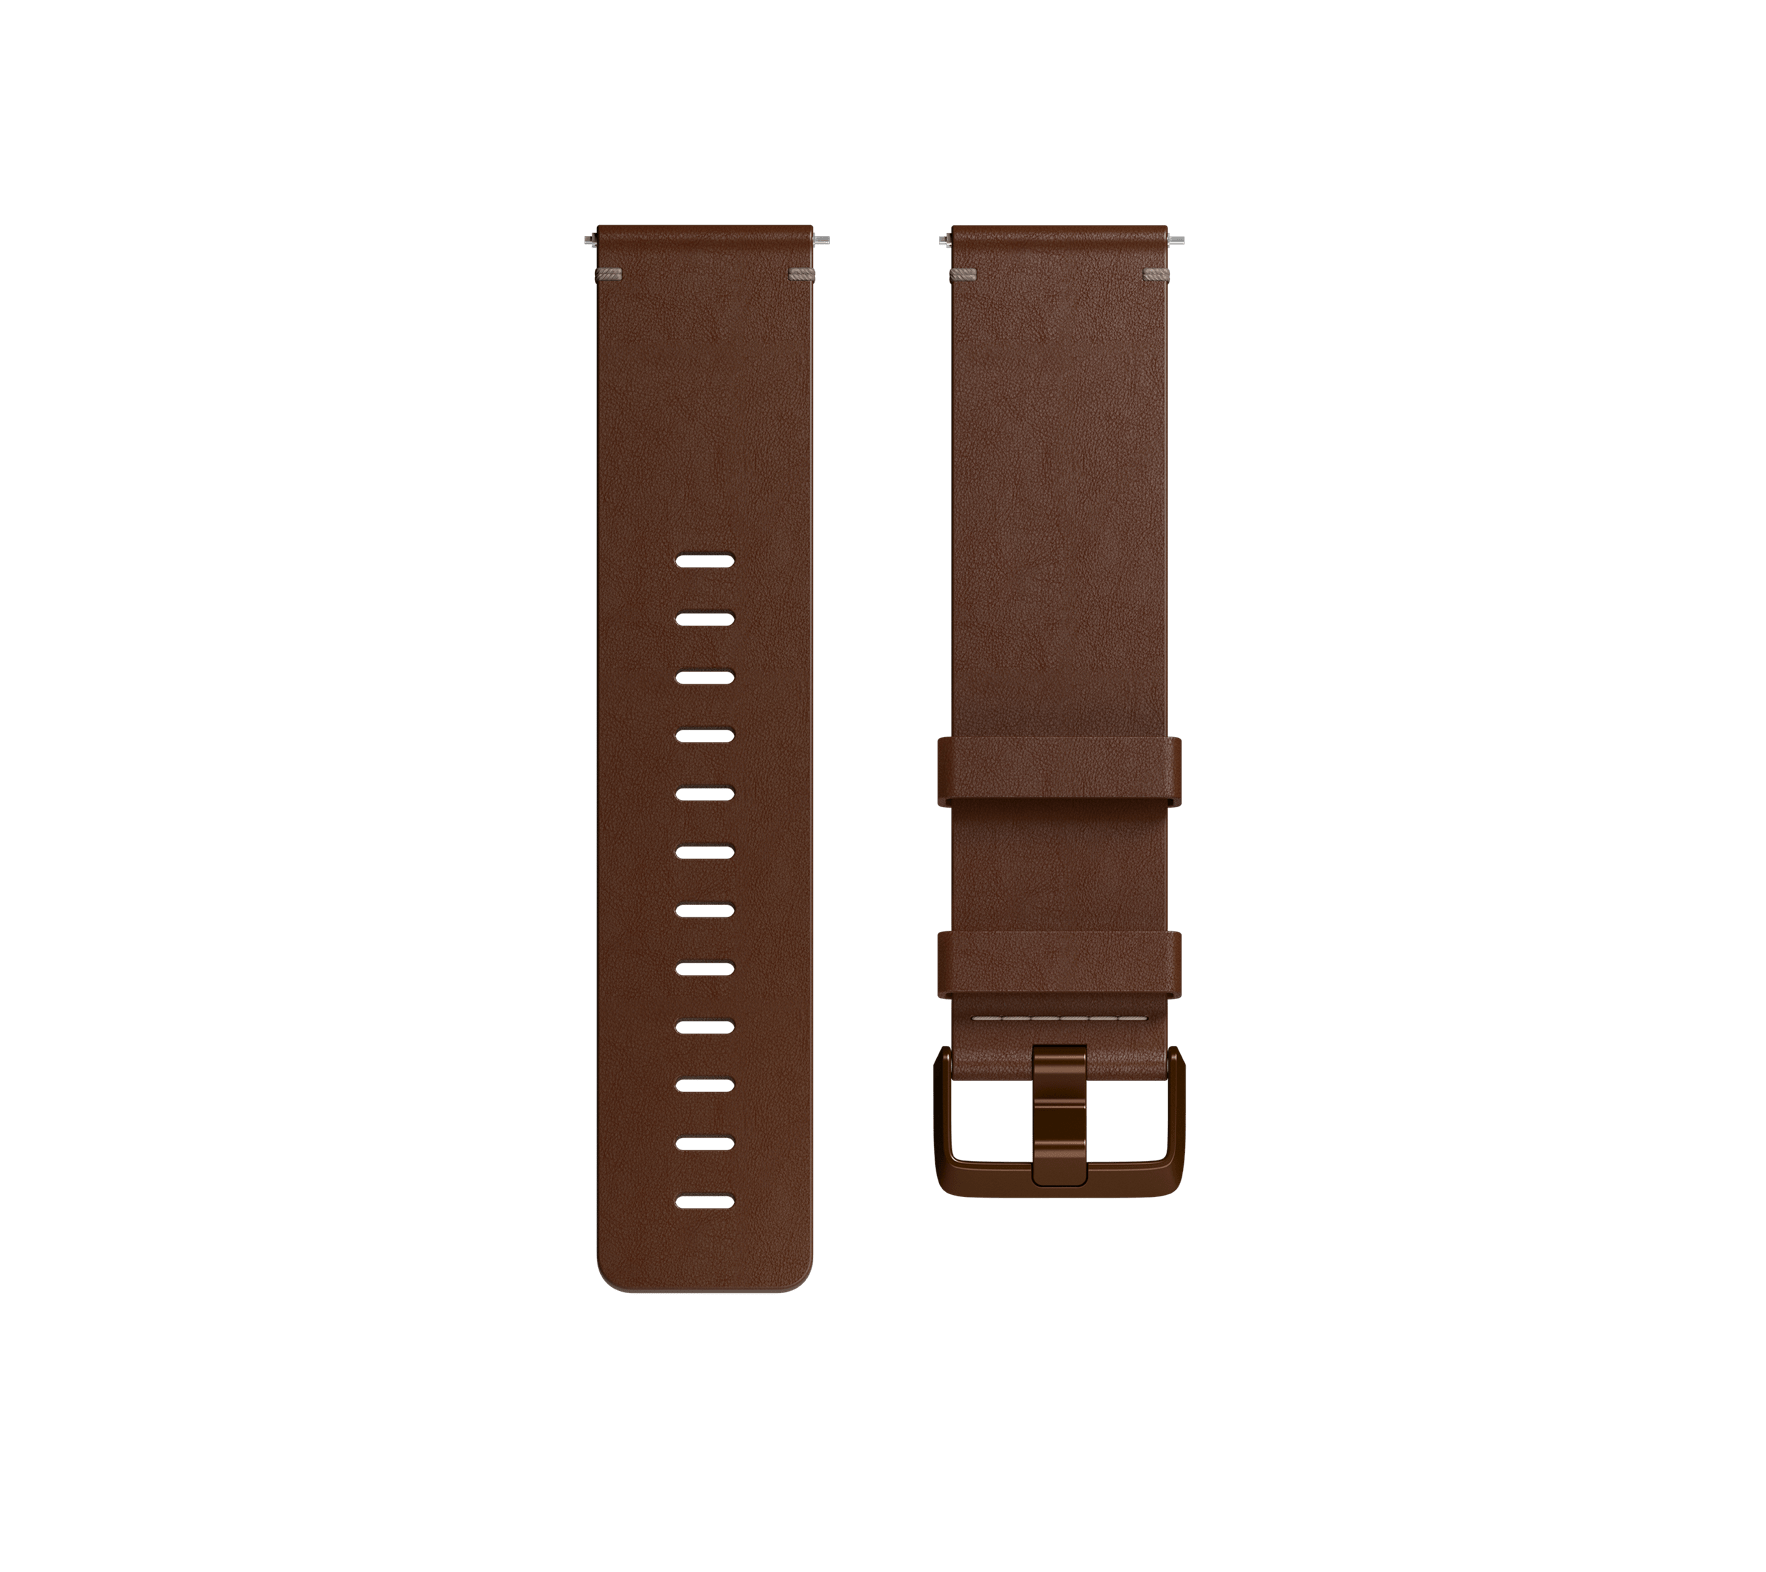 fitbit versa family horween leather band